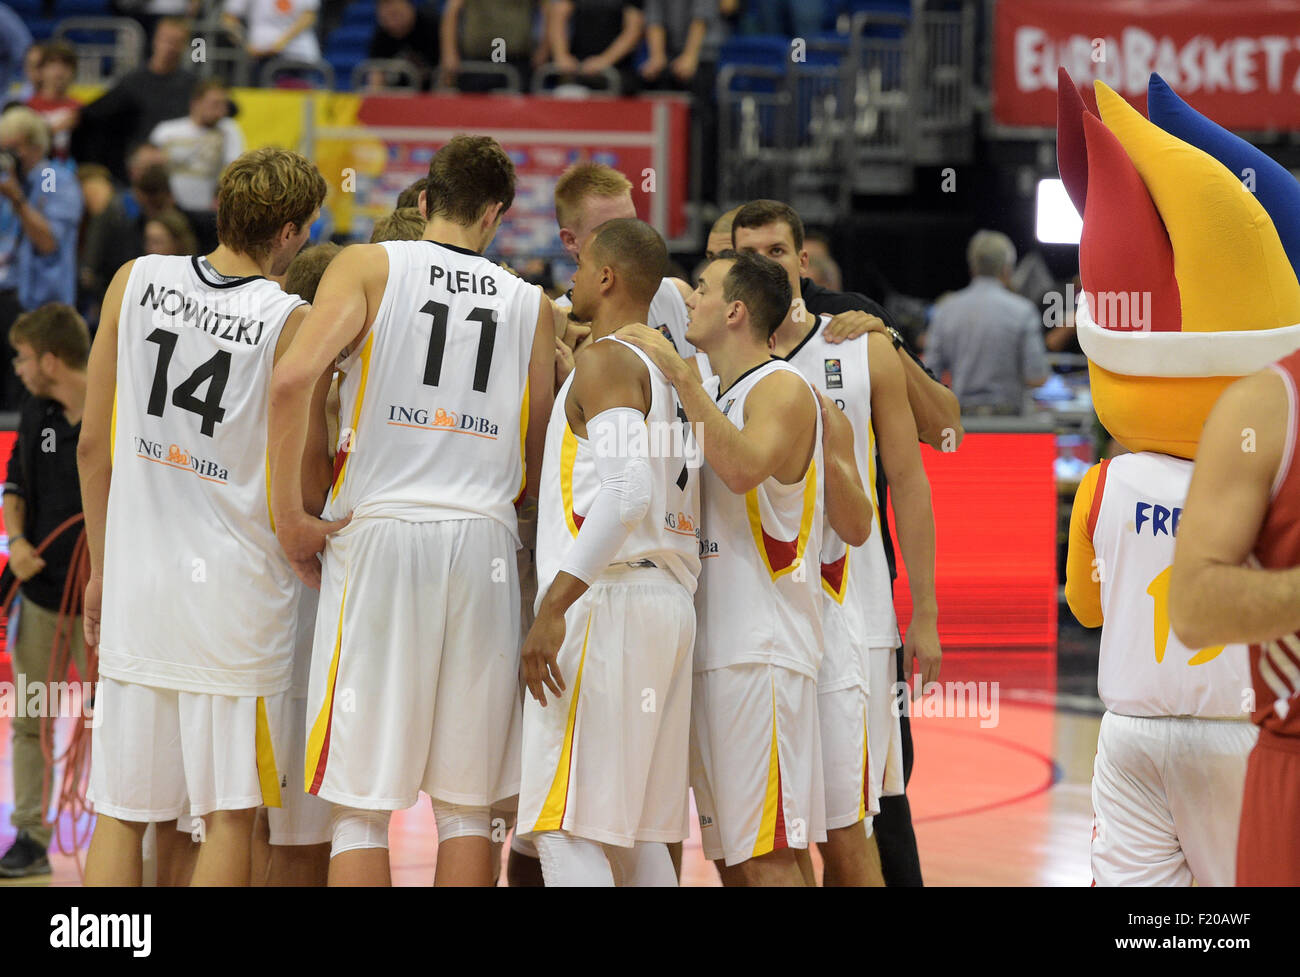 Berlin, Germany. 8th Sep, 2015. Germany's team stand together after the FIBA EuroBasket 2015 Group B match Germany vs Turkey in Berlin, Germany, 8 September 2015. Germany lost 75:80. Photo: Rainer Jensen/dpa/Alamy Live News Stock Photo